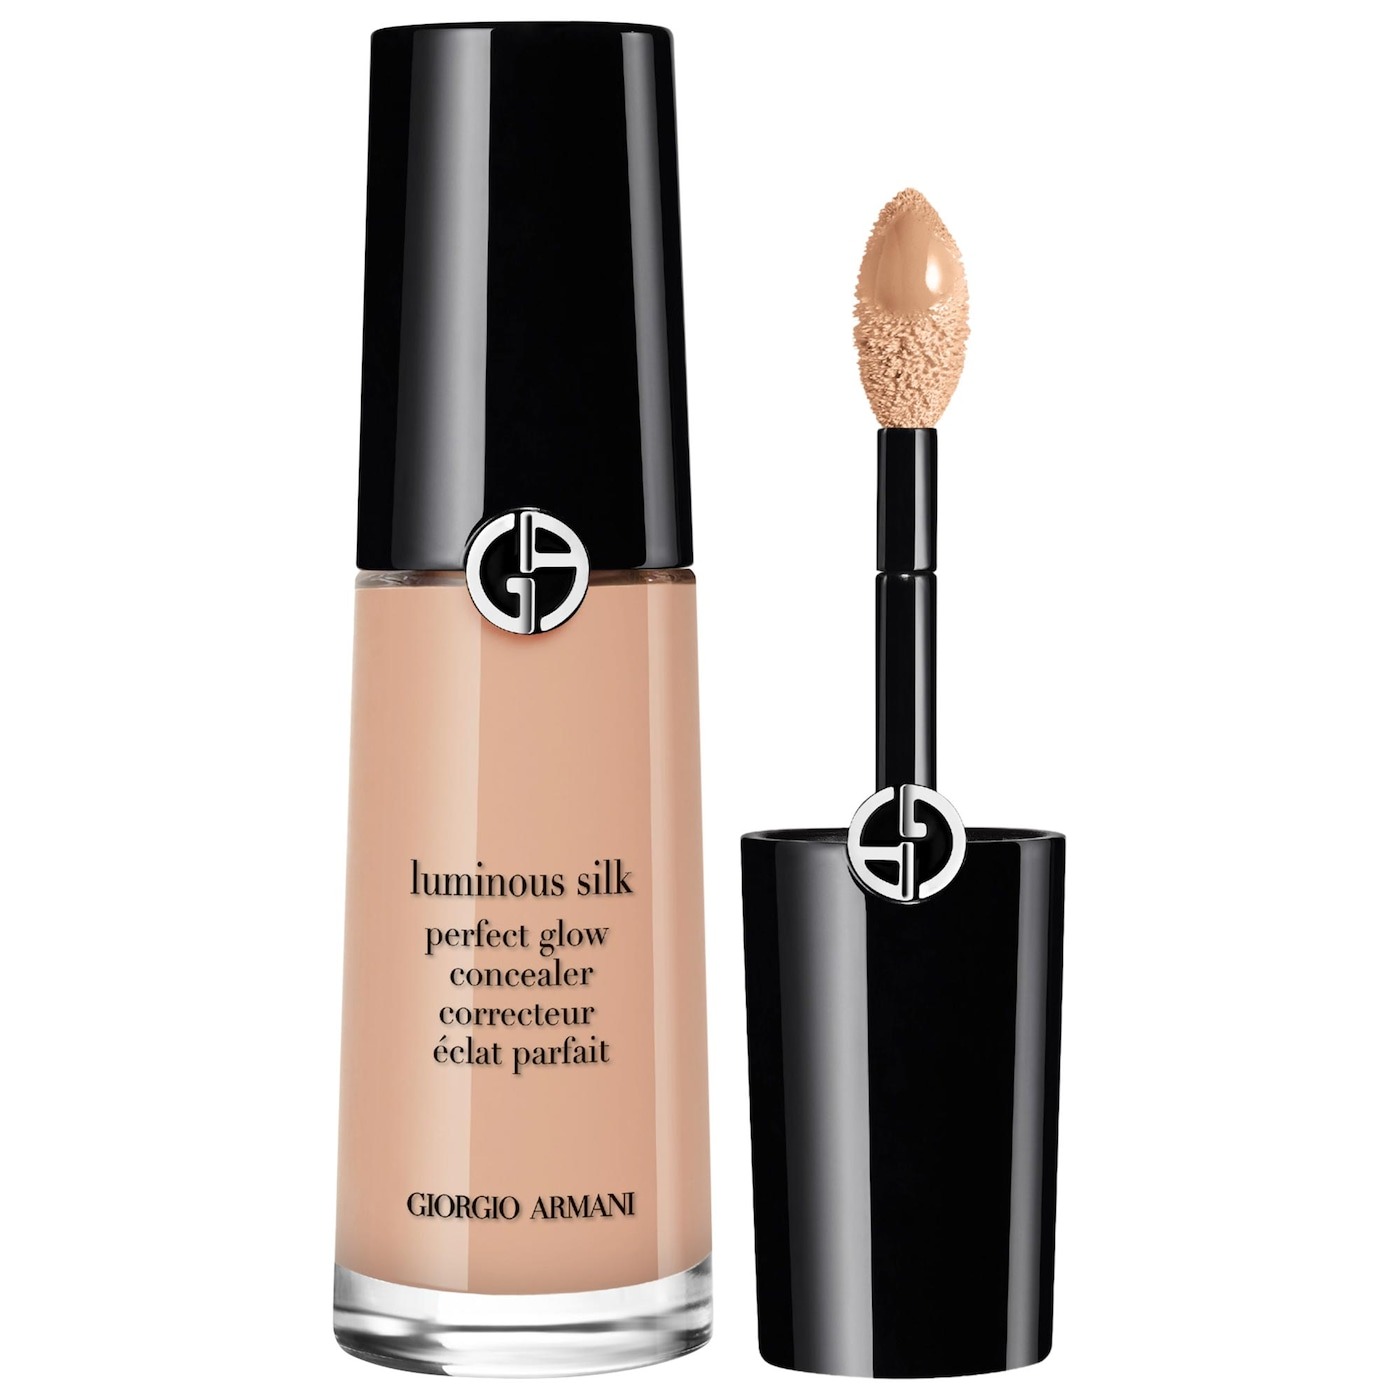 Armani Luminous Silk Face and Under-Eye Concealer